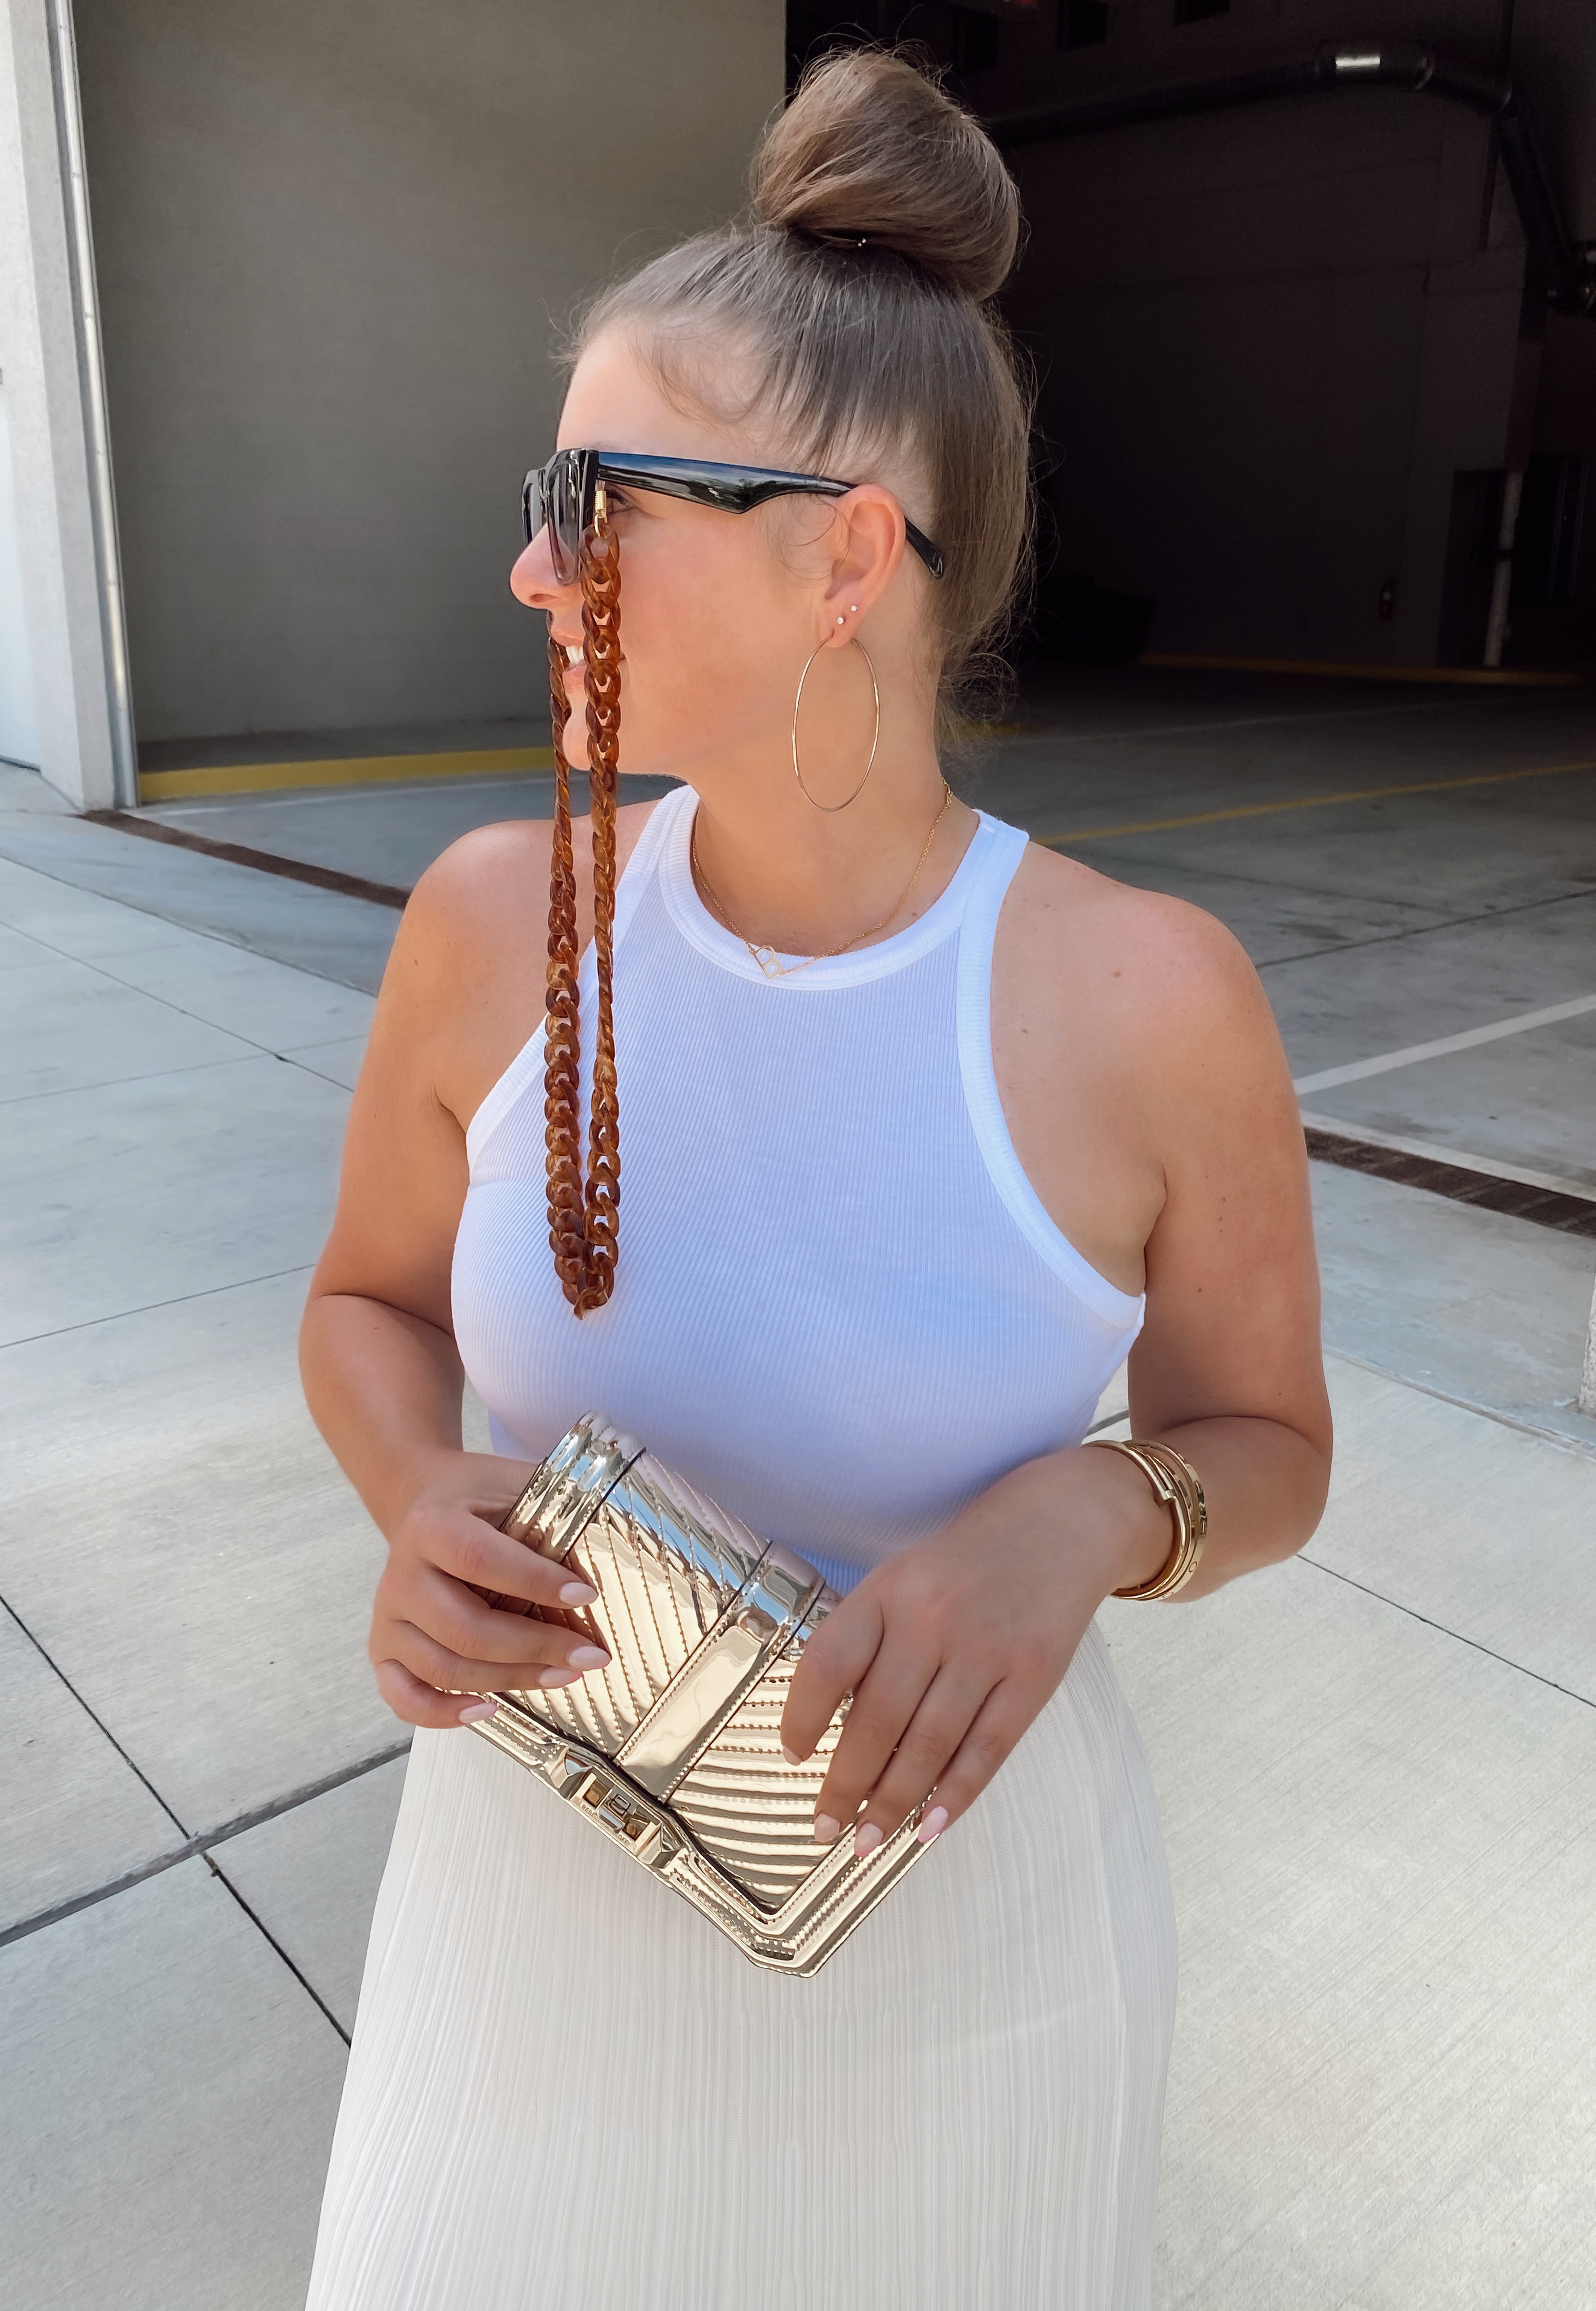 NEUTRAL OUTFIT IDEAS FOR SUMMER: http://www.juliamarieb.com/2020/07/12/5-neutral-outfit-ideas-for-summer/. @julia.marie.b